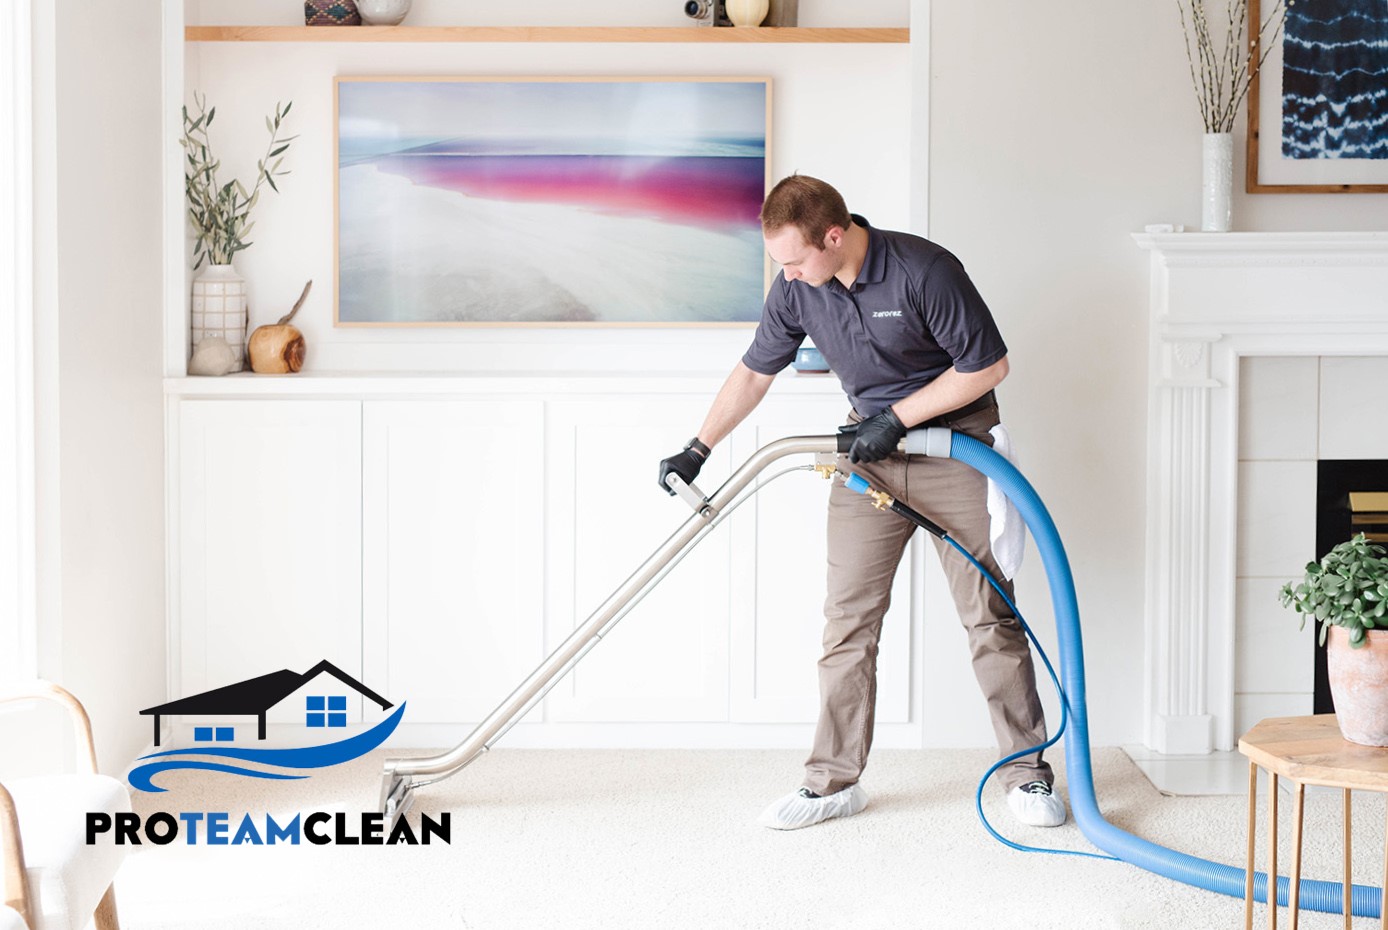 Carpet cleaning technician